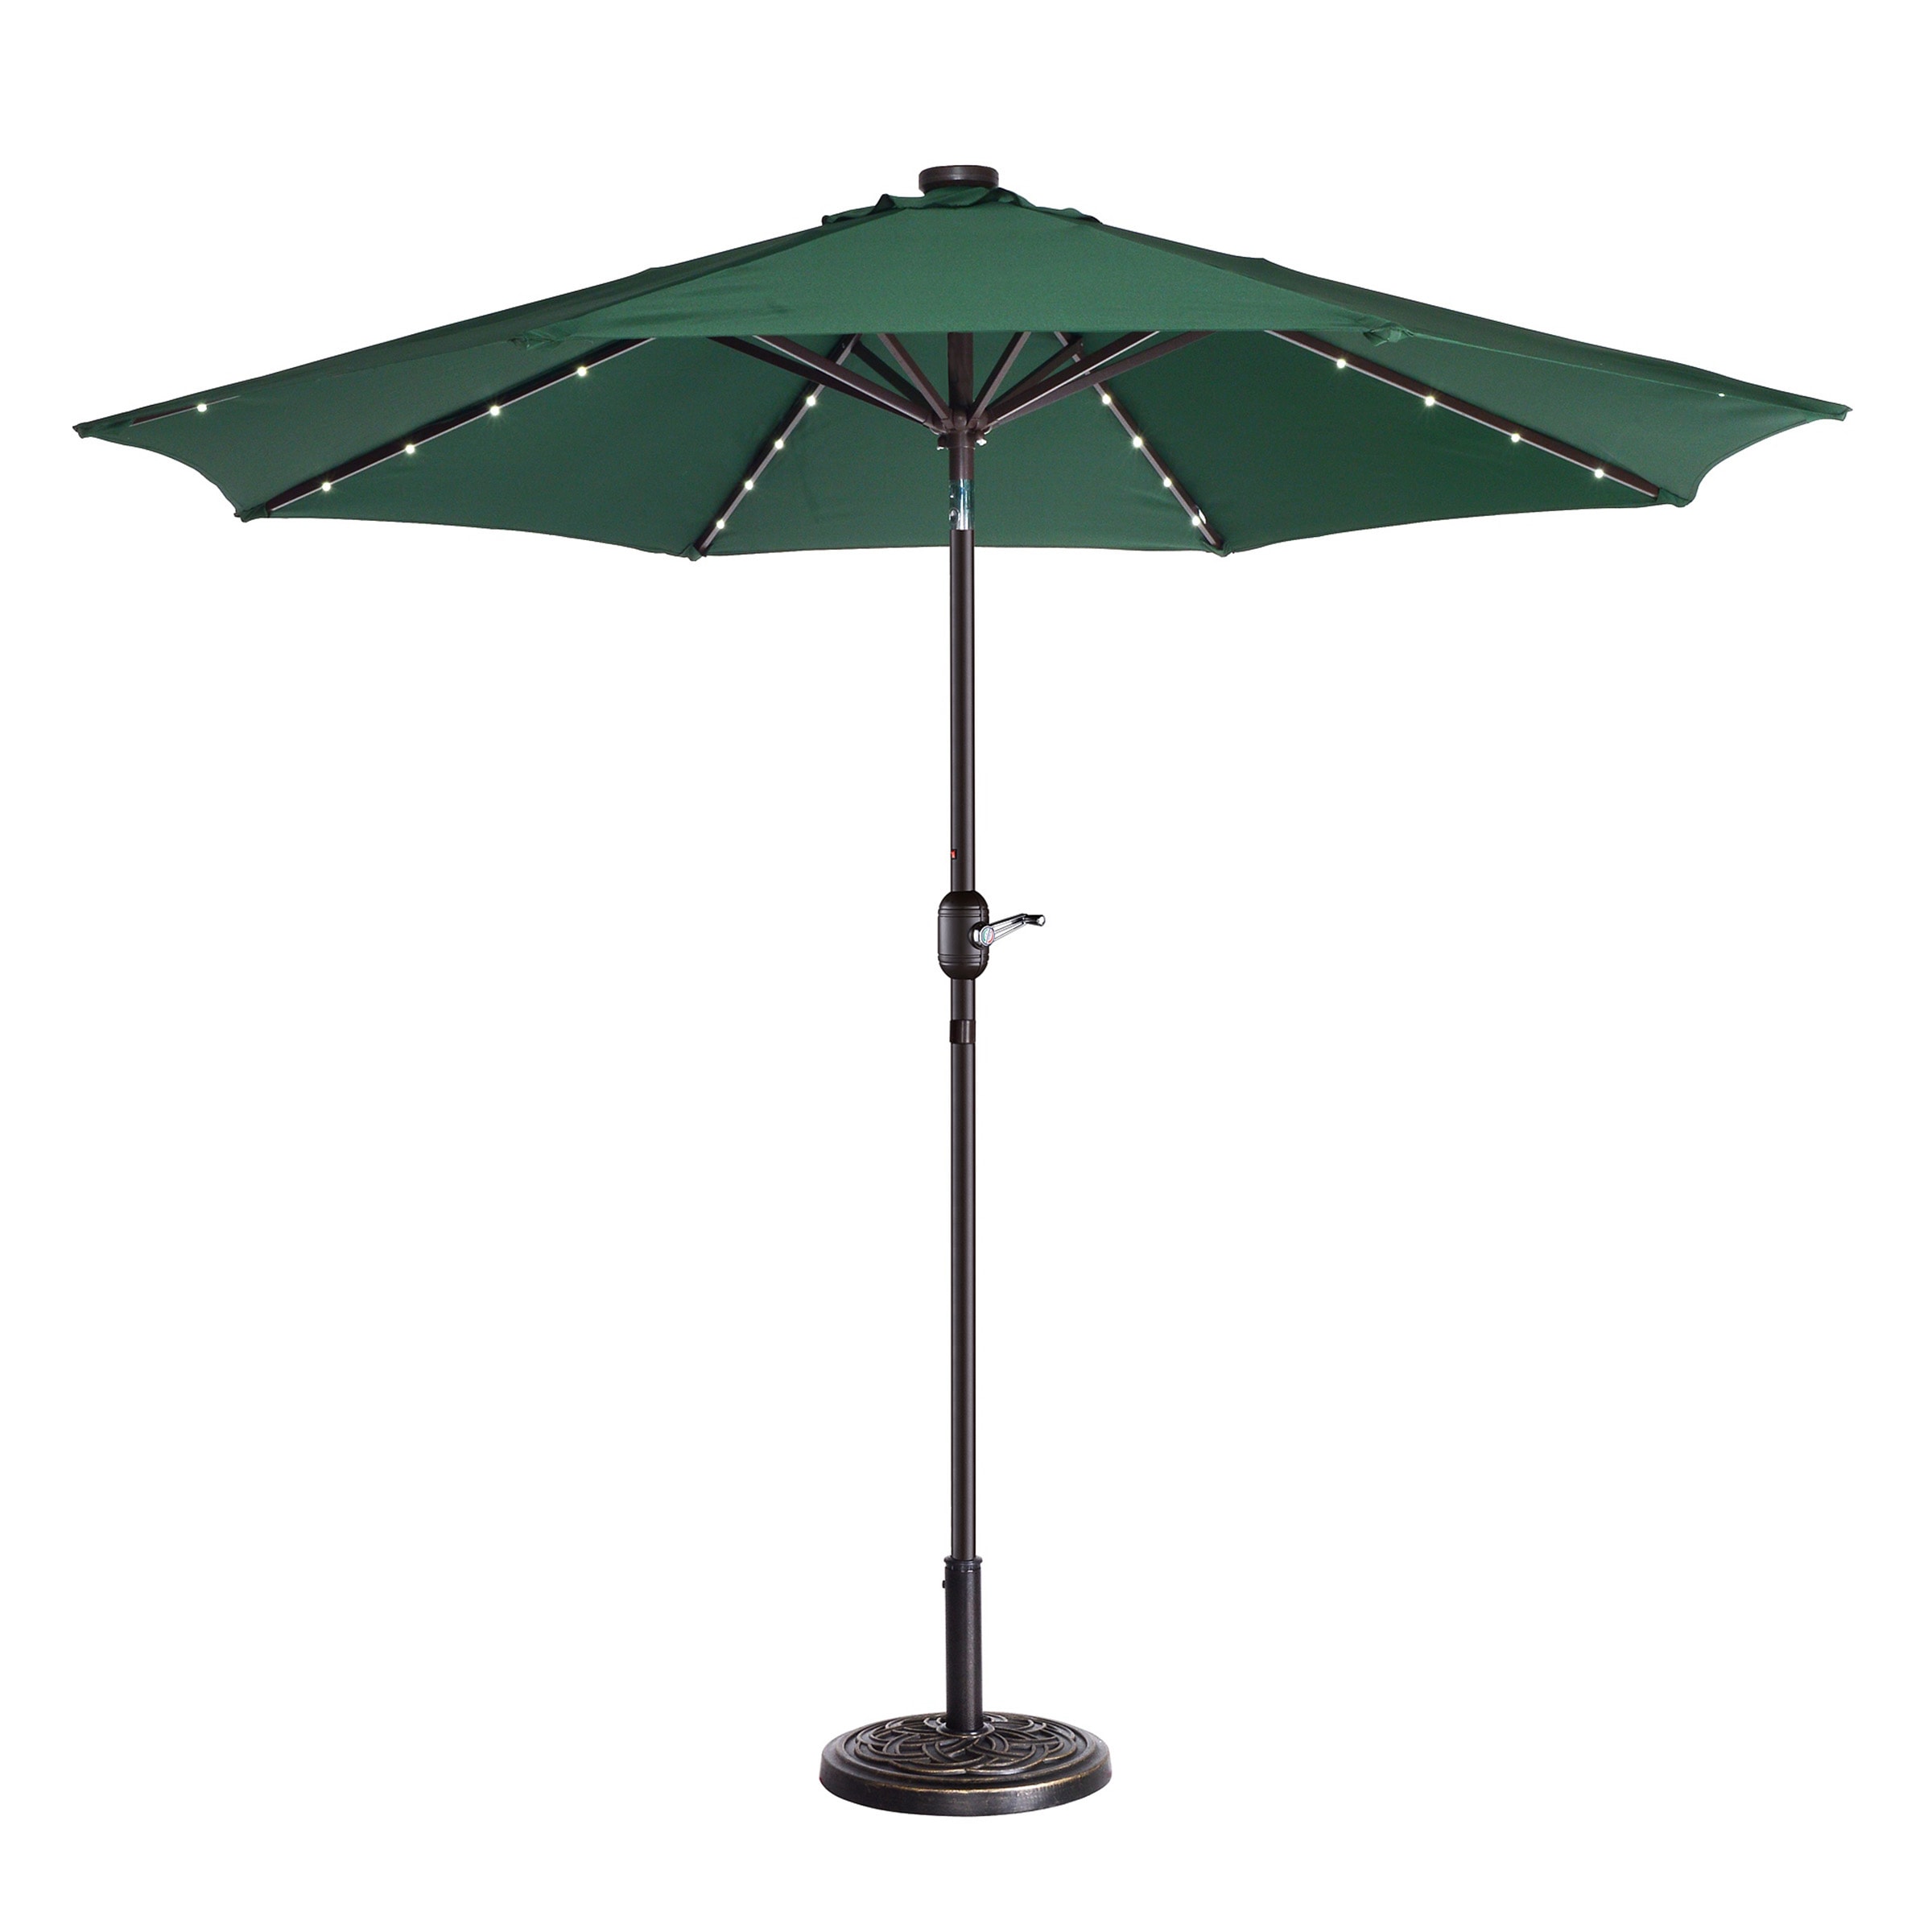 Nature Spring 9 Foot Patio Umbrella LED Lights, Green - Convenient and Colorful Outdoor Umbrella with Crank Handle and Durable Polyester Canopy -  526822CAX